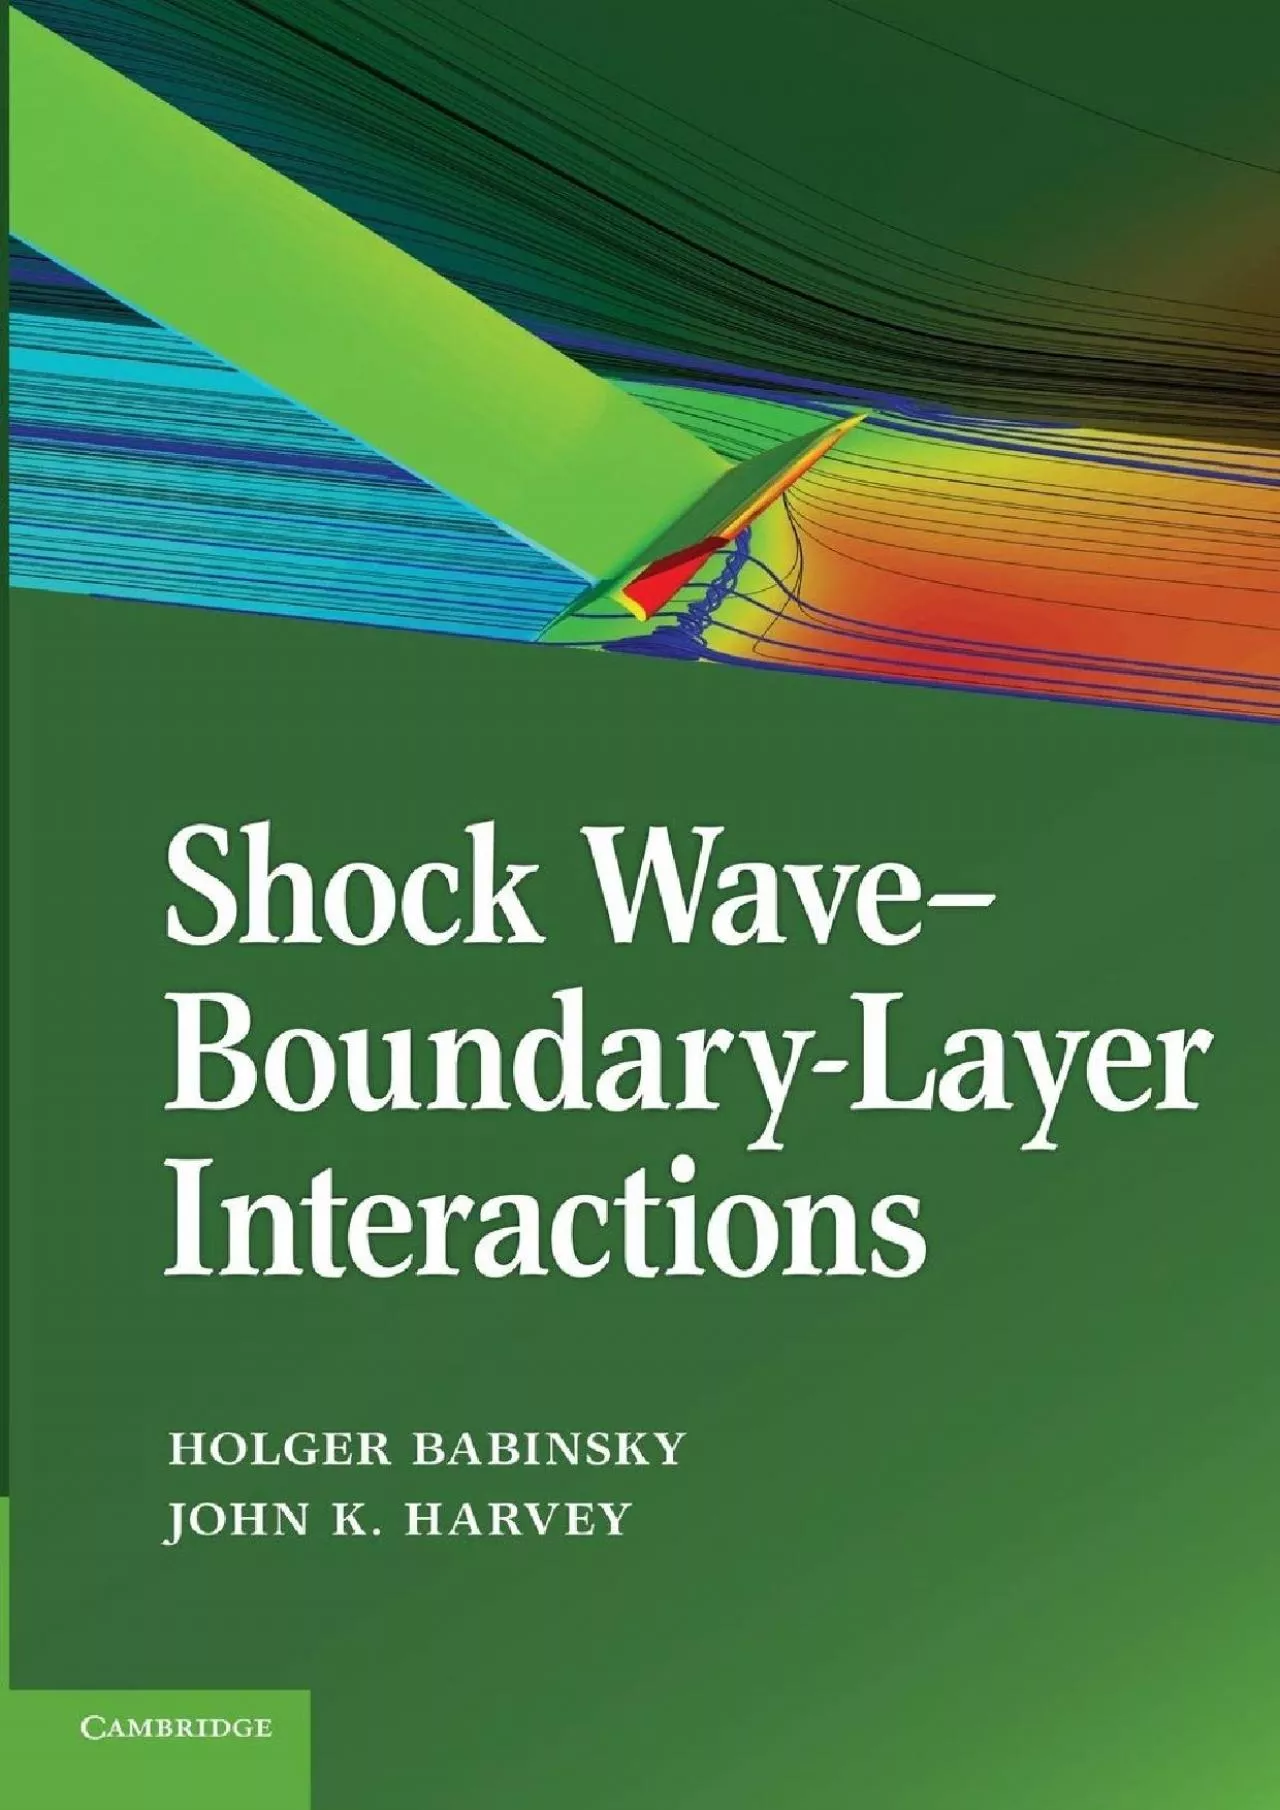 (EBOOK)-Shock Wave-Boundary-Layer Interactions (Cambridge Aerospace Series, Series Number